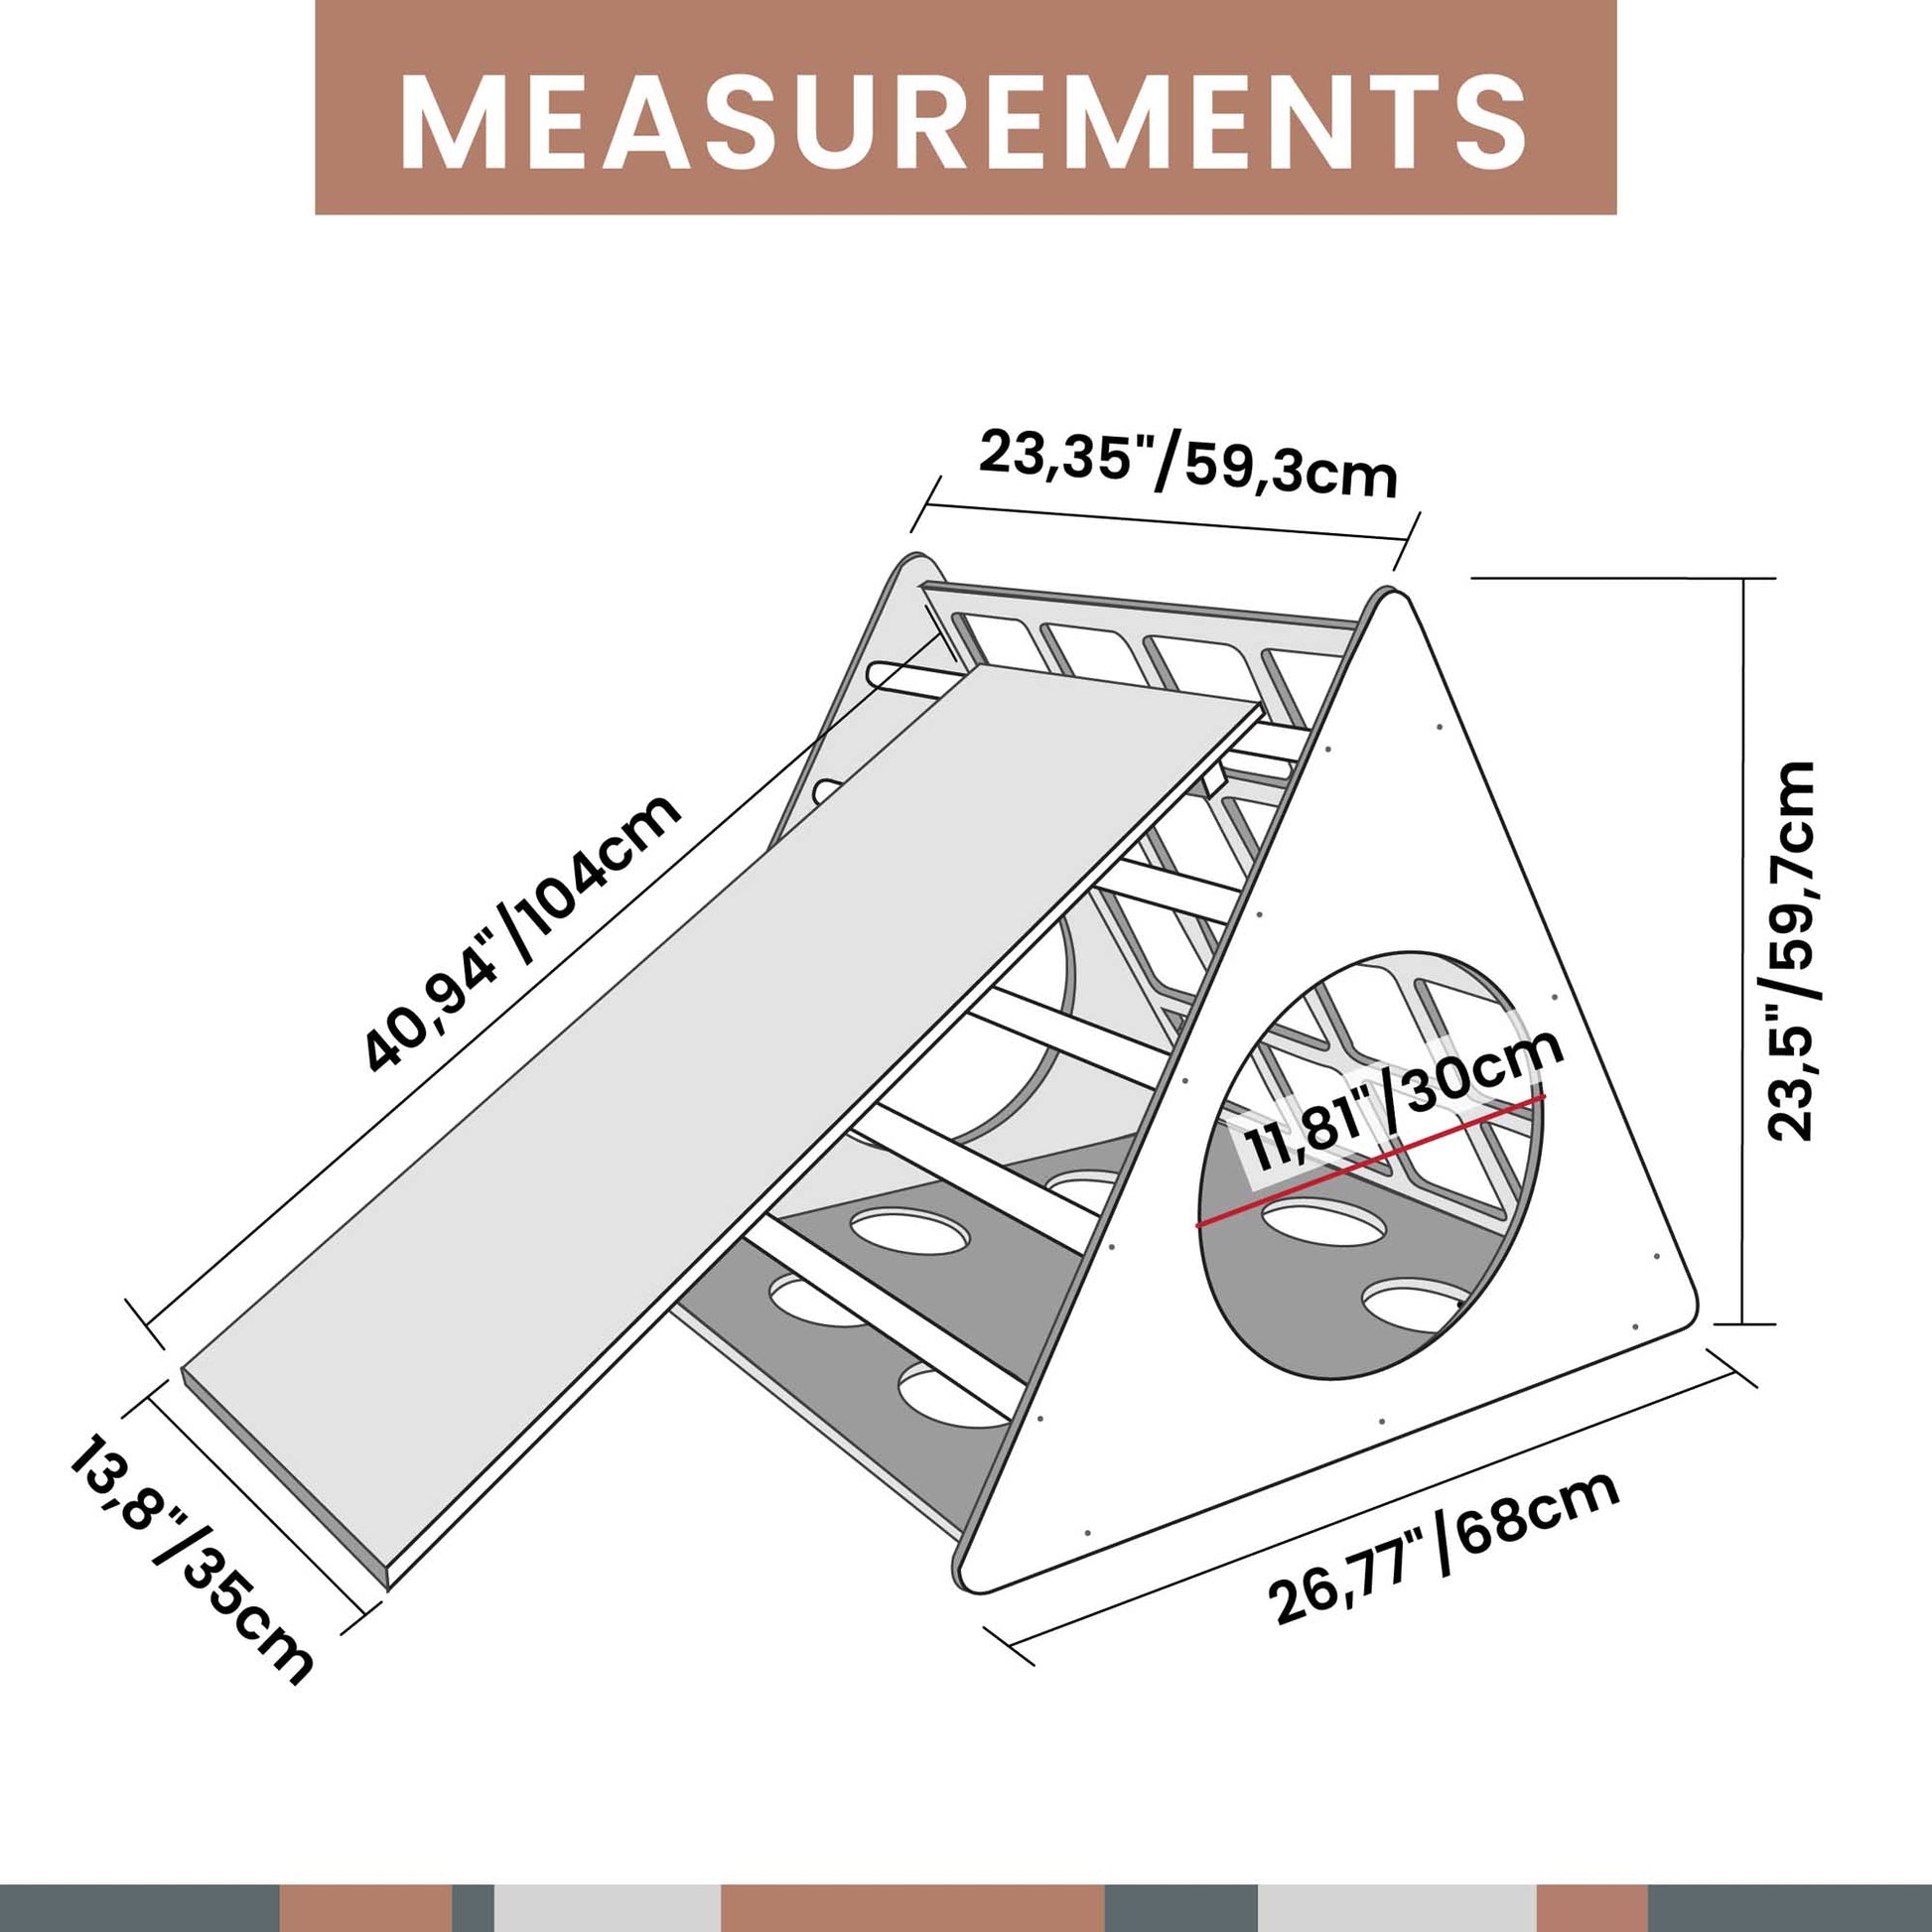 A diagram showing the measurements of an indoor climber activity set and Climbing triangle with sensory panels.